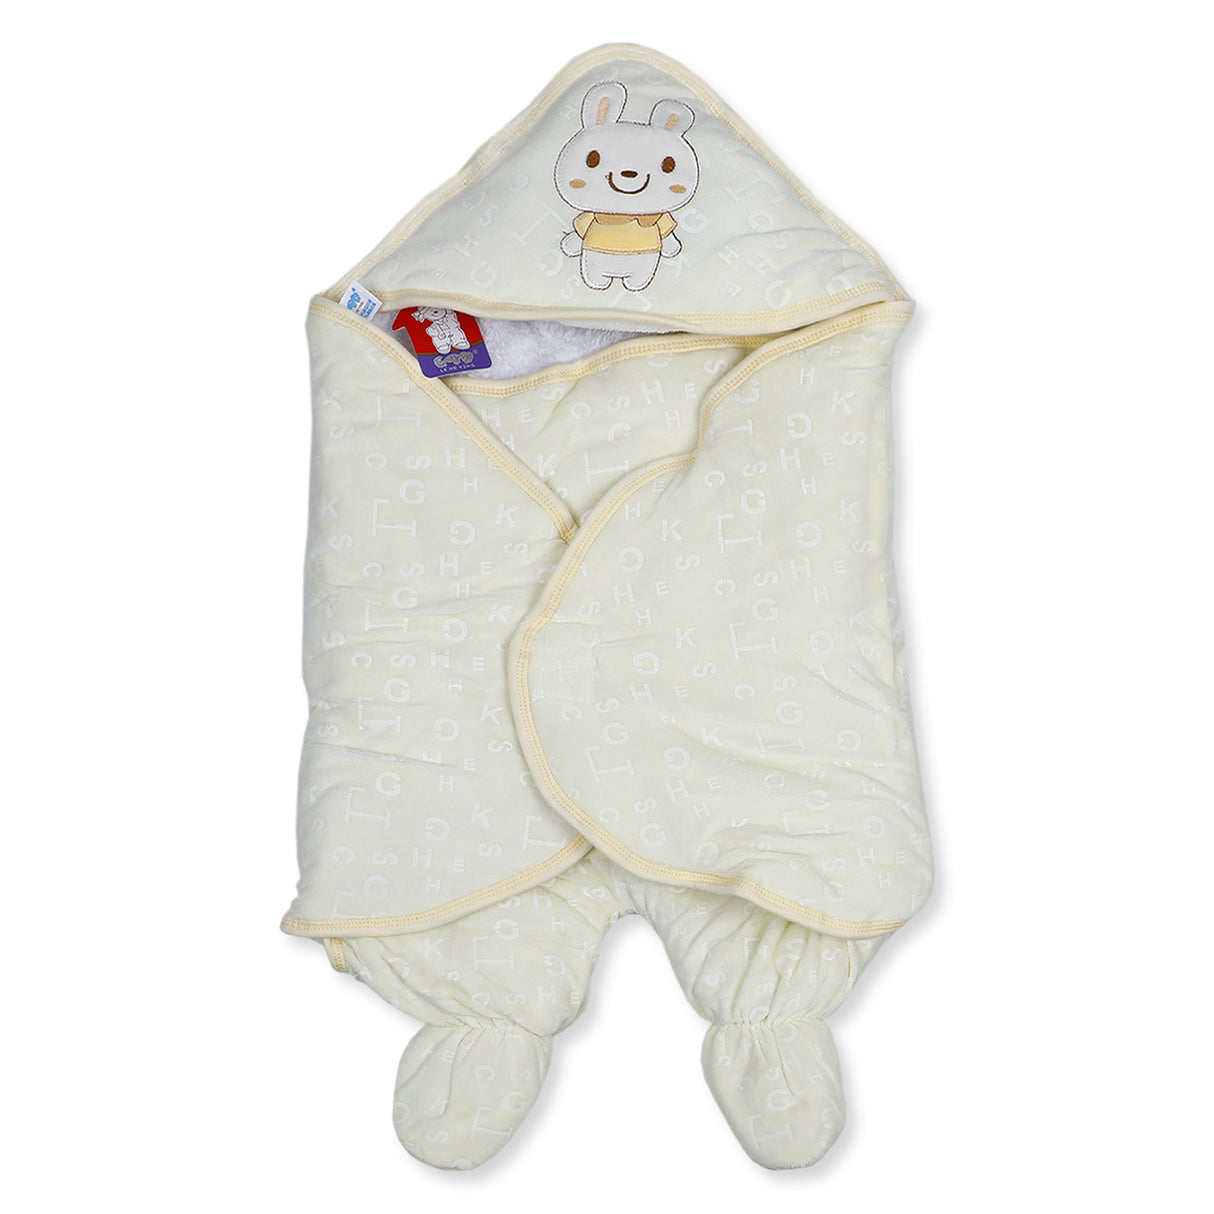 Adrolable Hooded Ready Swaddle